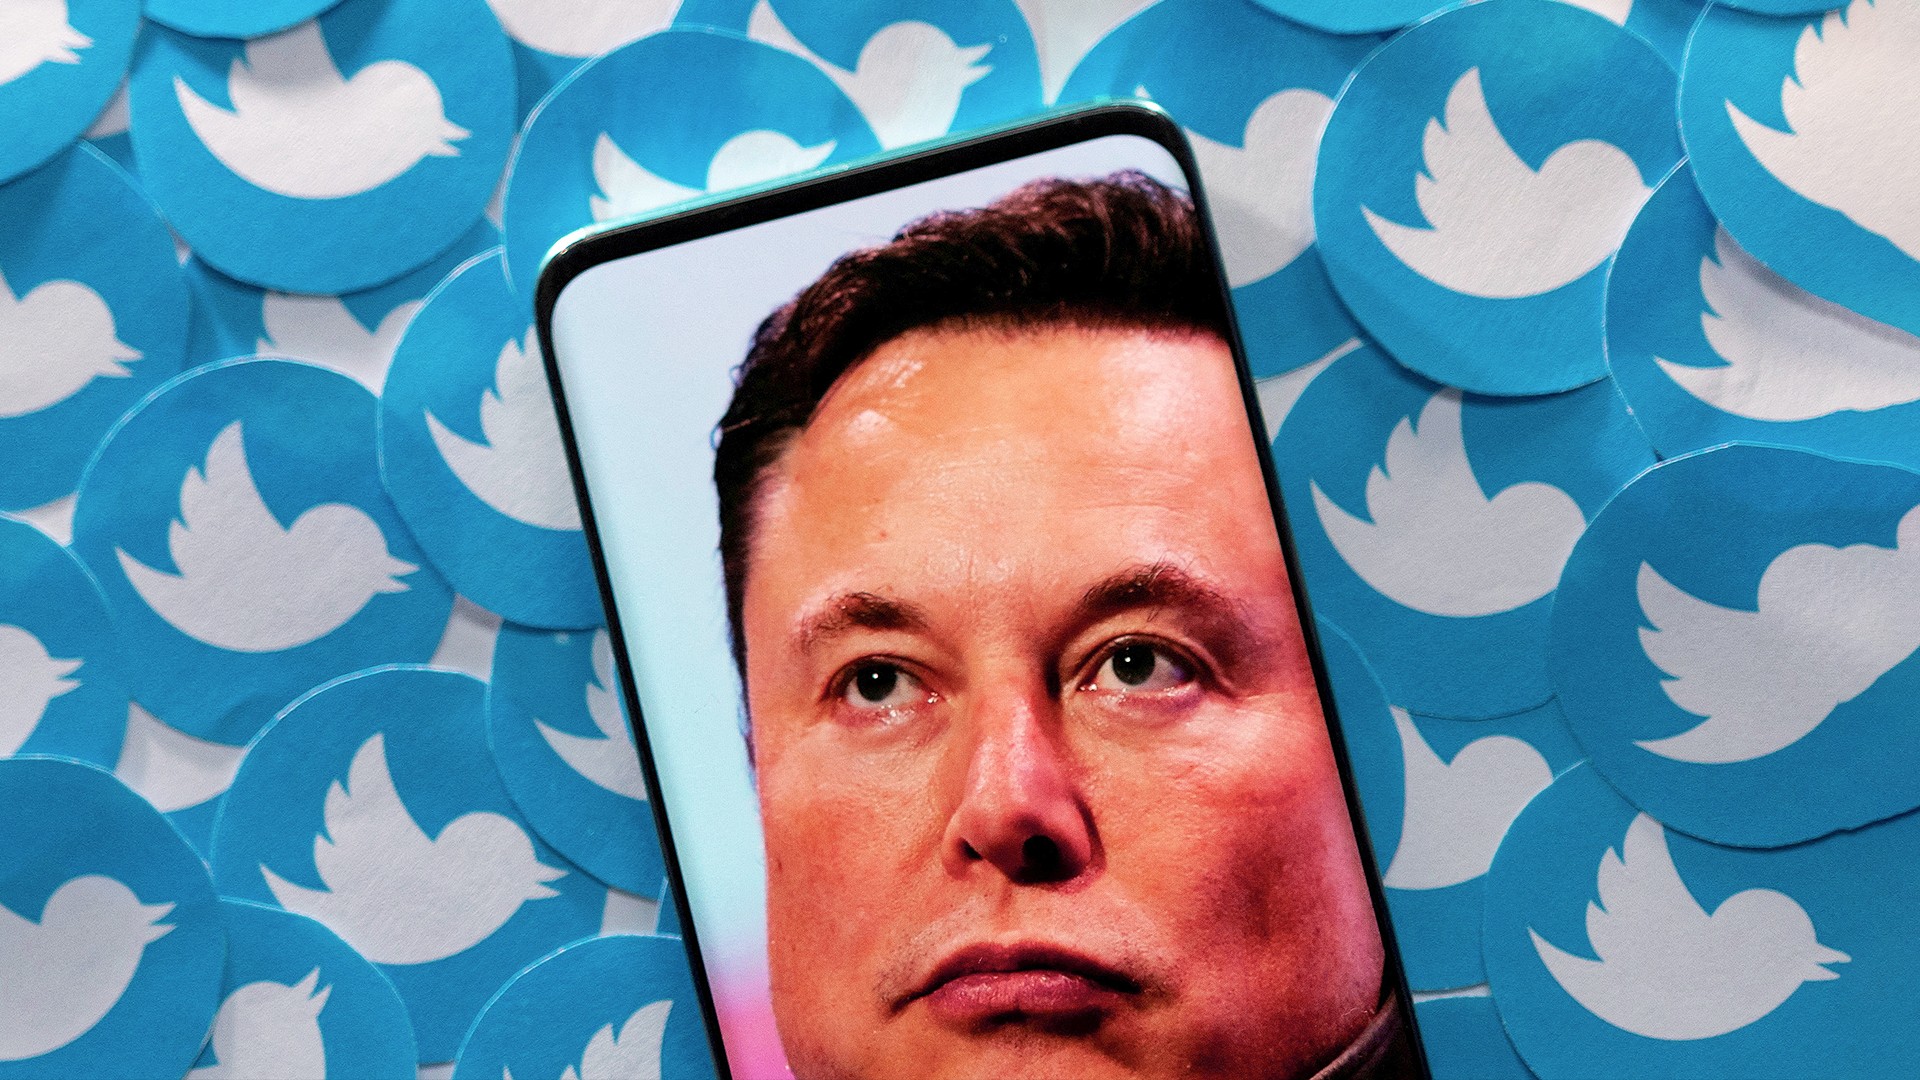 Elon Musk says he would build his own phone if Twitter was banned by Apple and Google
